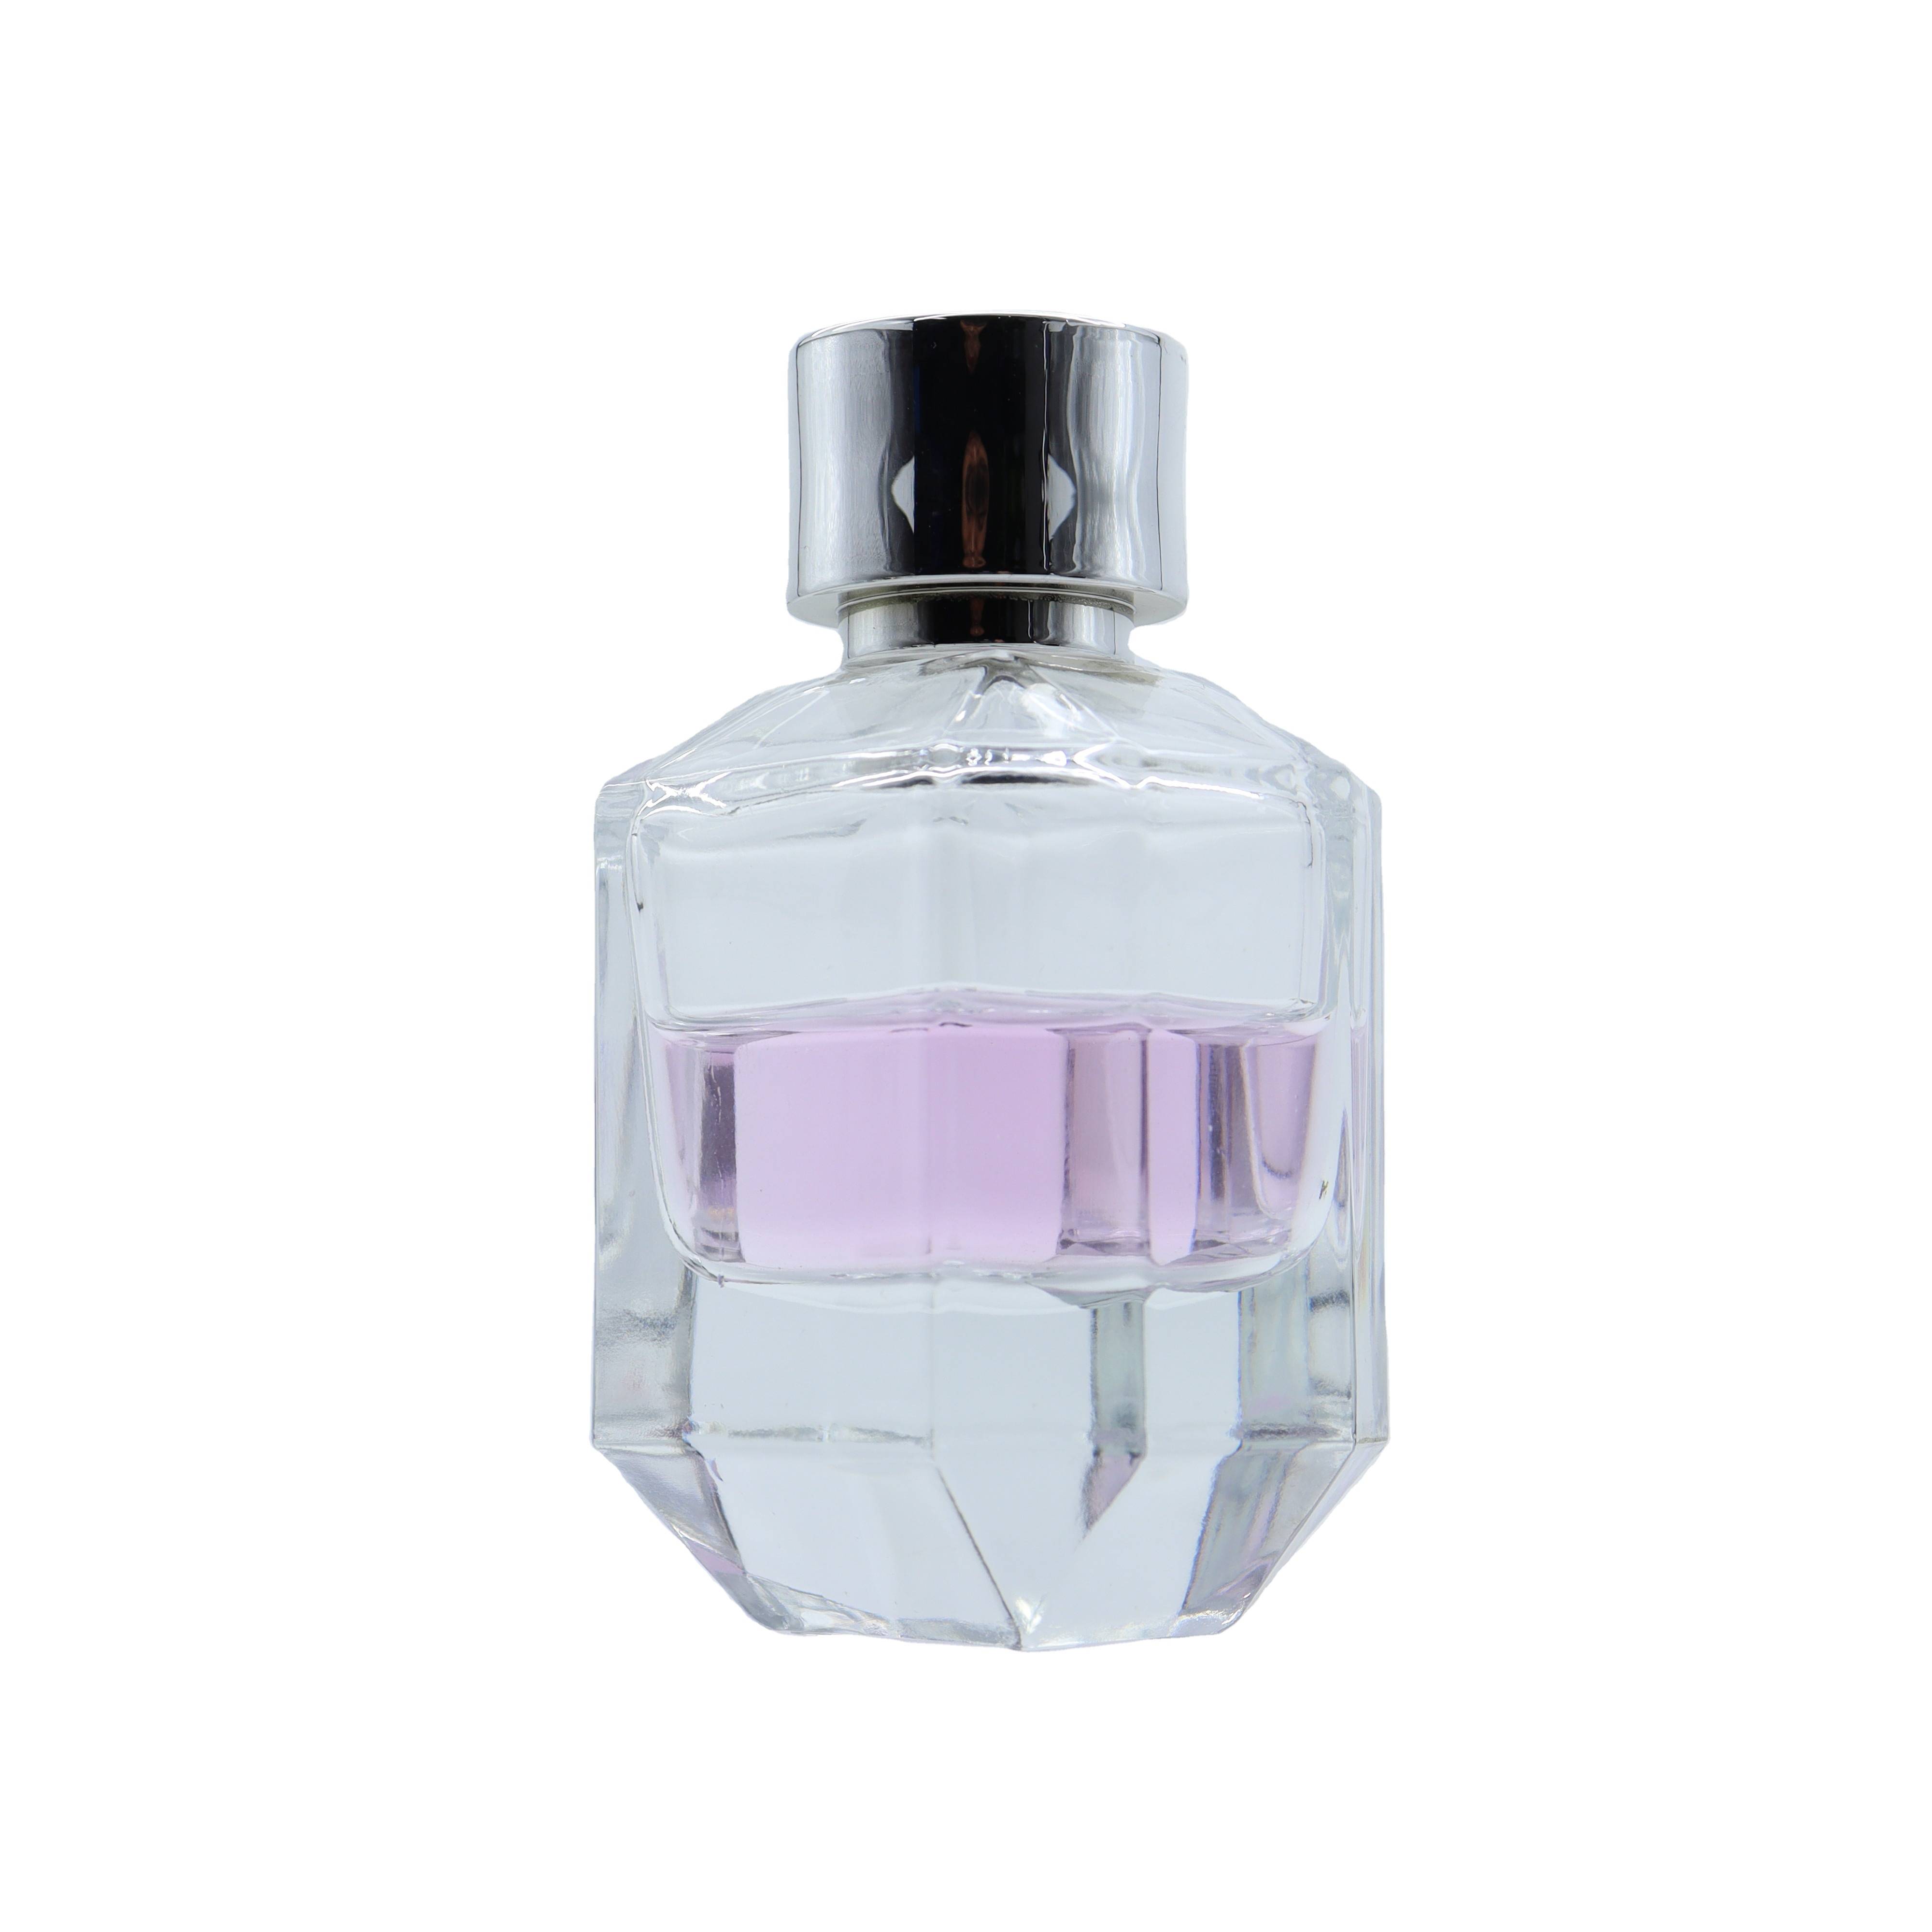 Pretty New design glass perfume bottle 80 ml luxurious bottle with competitive price